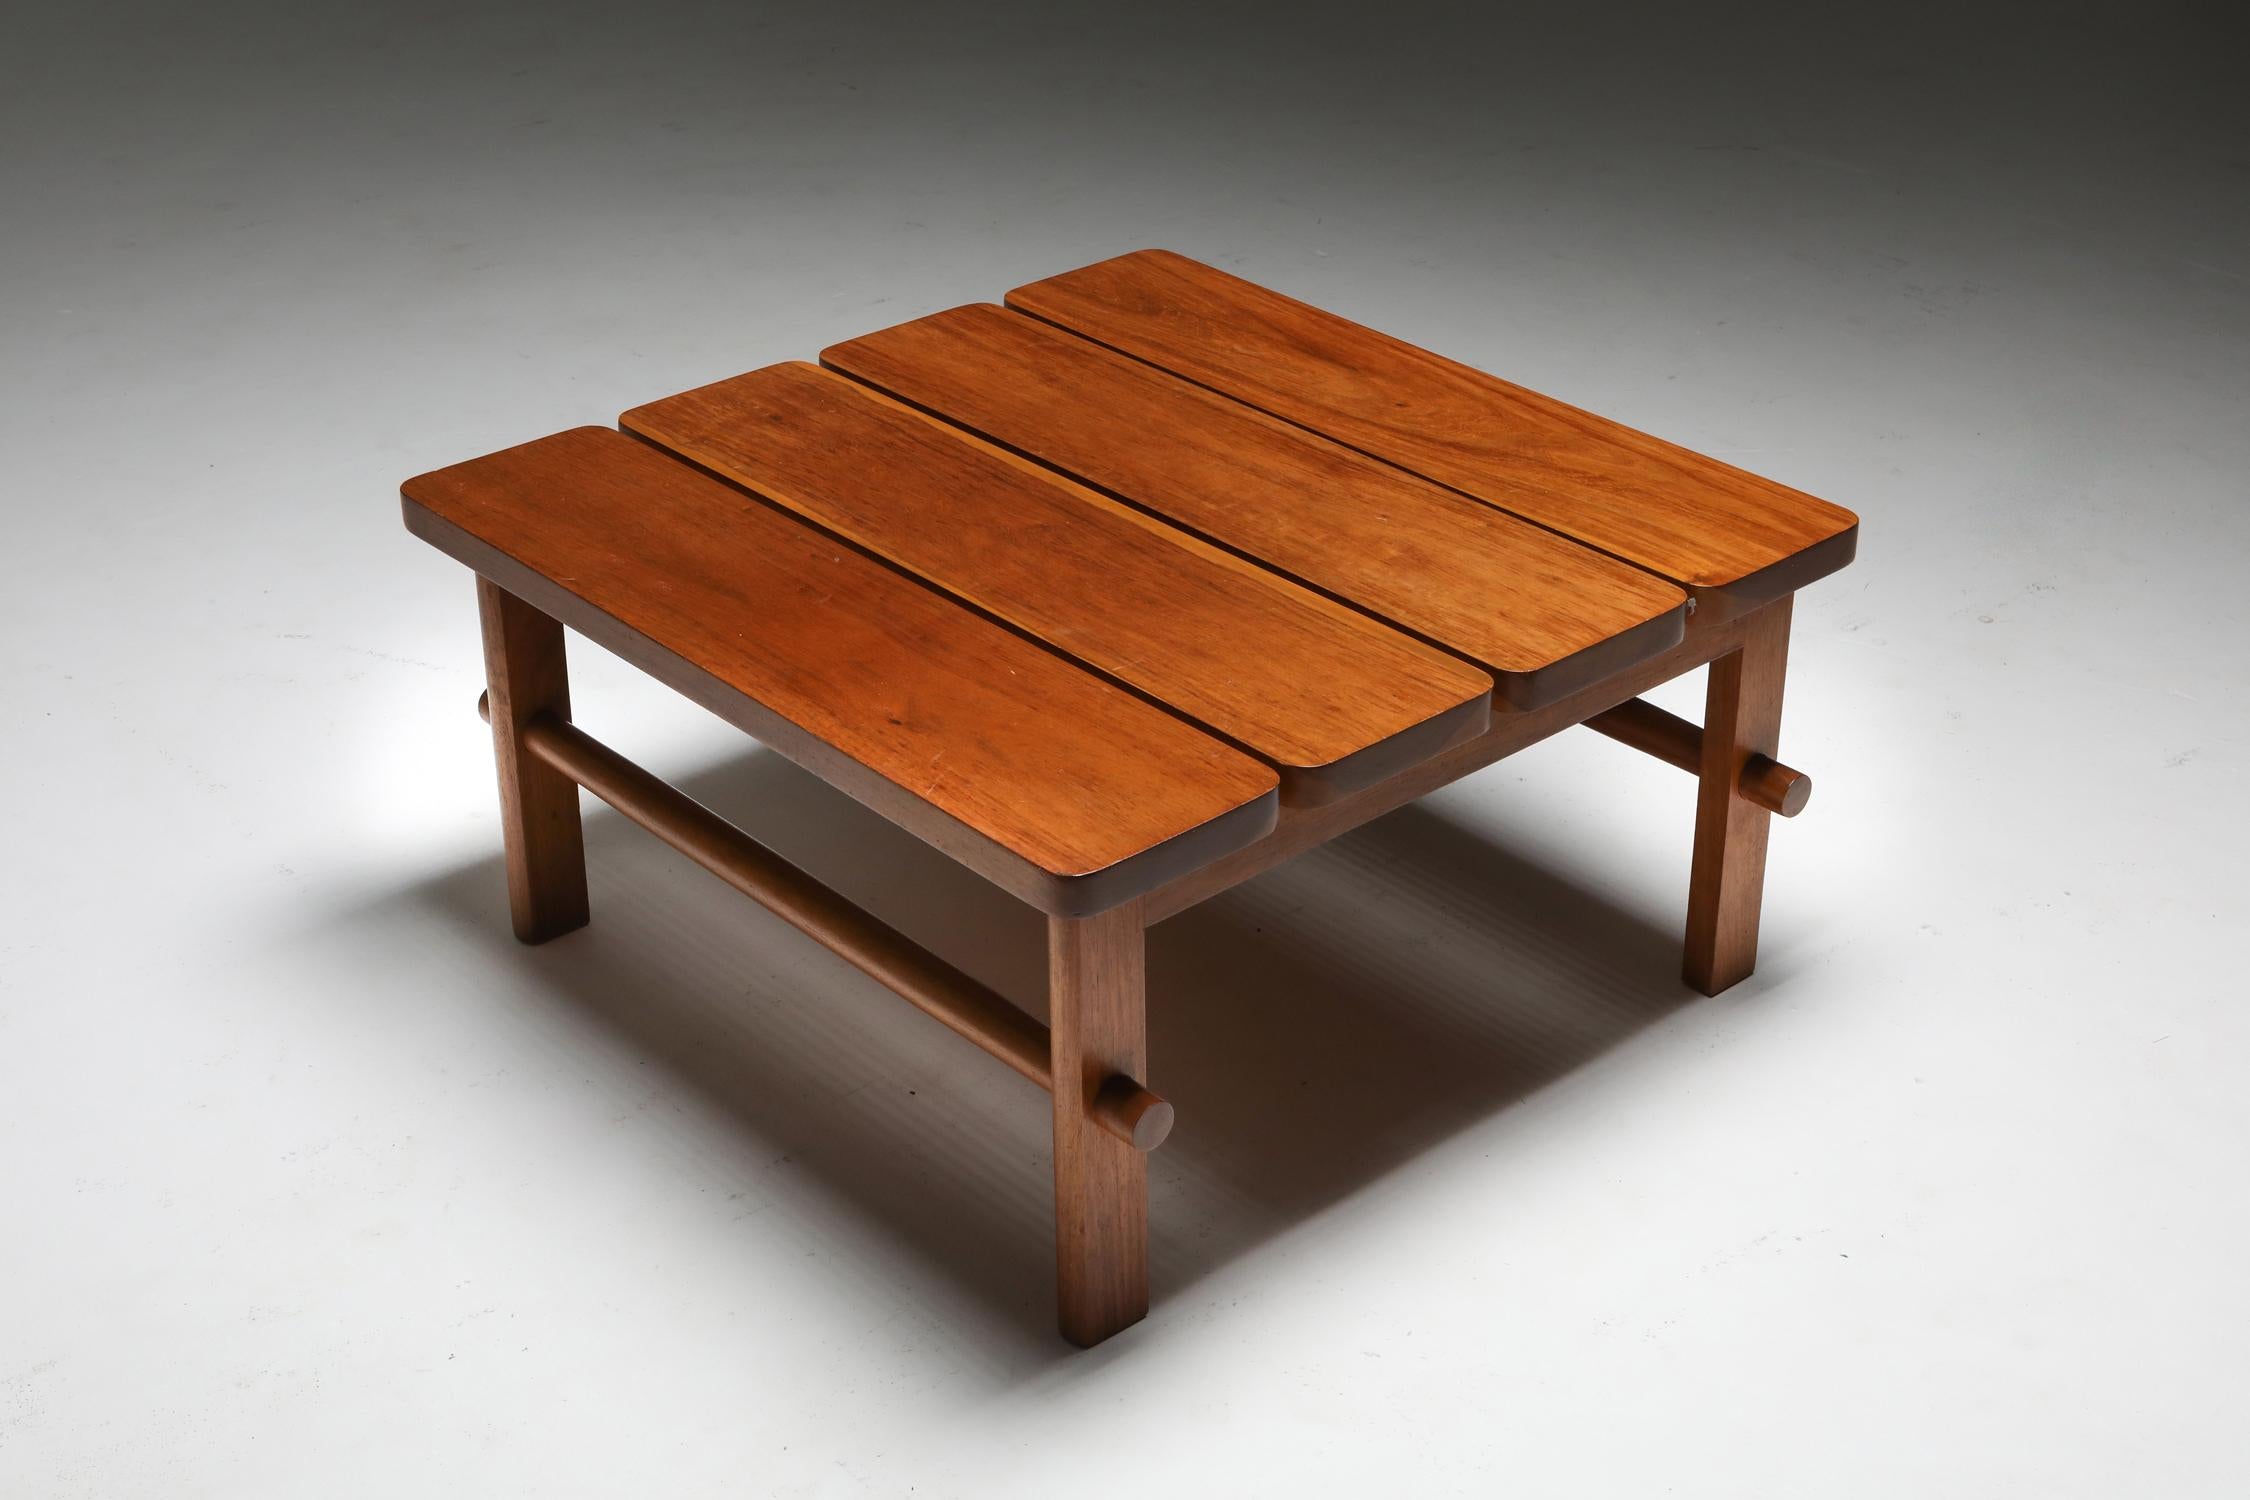 Hardwood Mid-Century Modern coffee table, Brazil, 1960s

Simple and elegant design
Form and function
All characteristics of this piece refer to great design
Think Joaquim Tenreiro, Sergio Rodrigues and others.

  